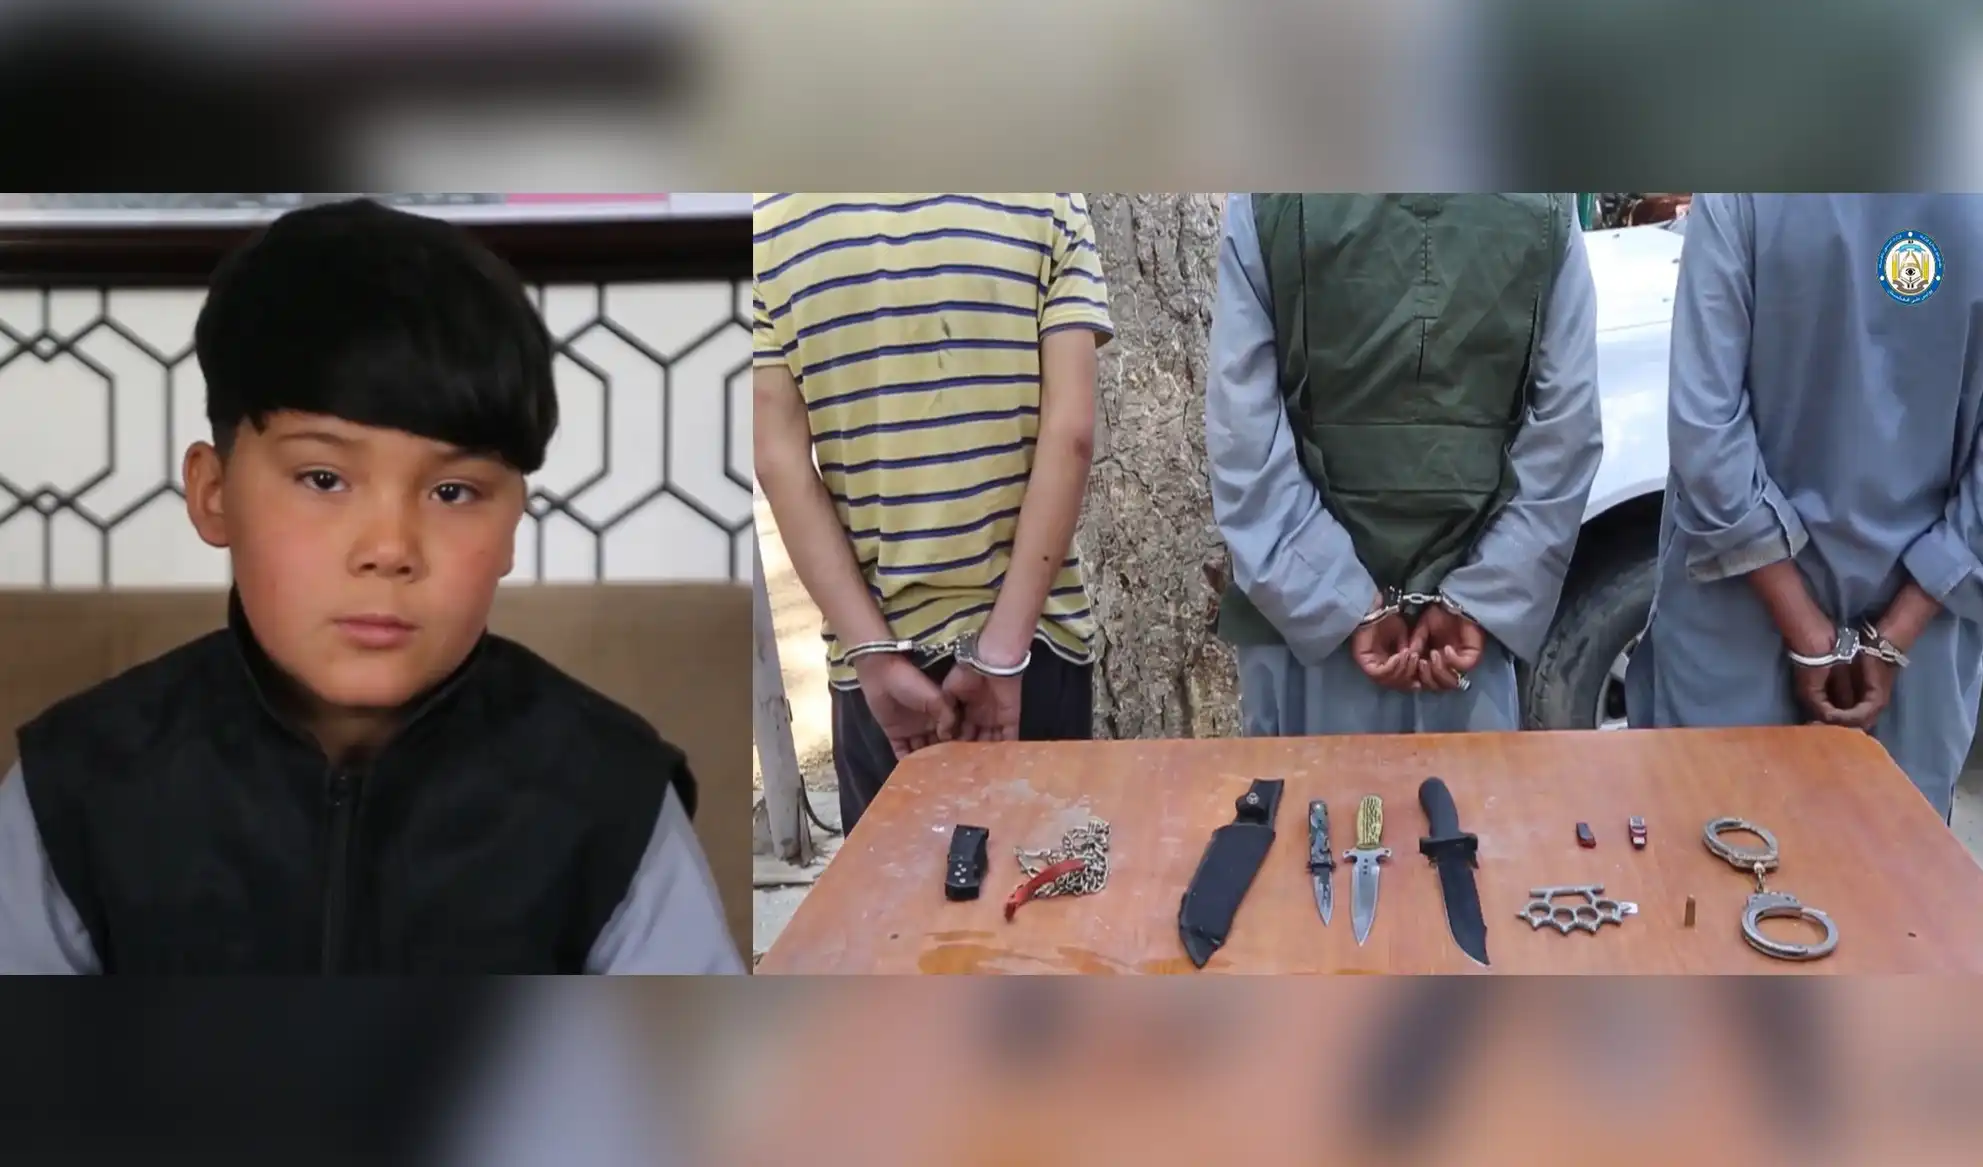 Child rescued; 3 kidnappers detained in Kabul